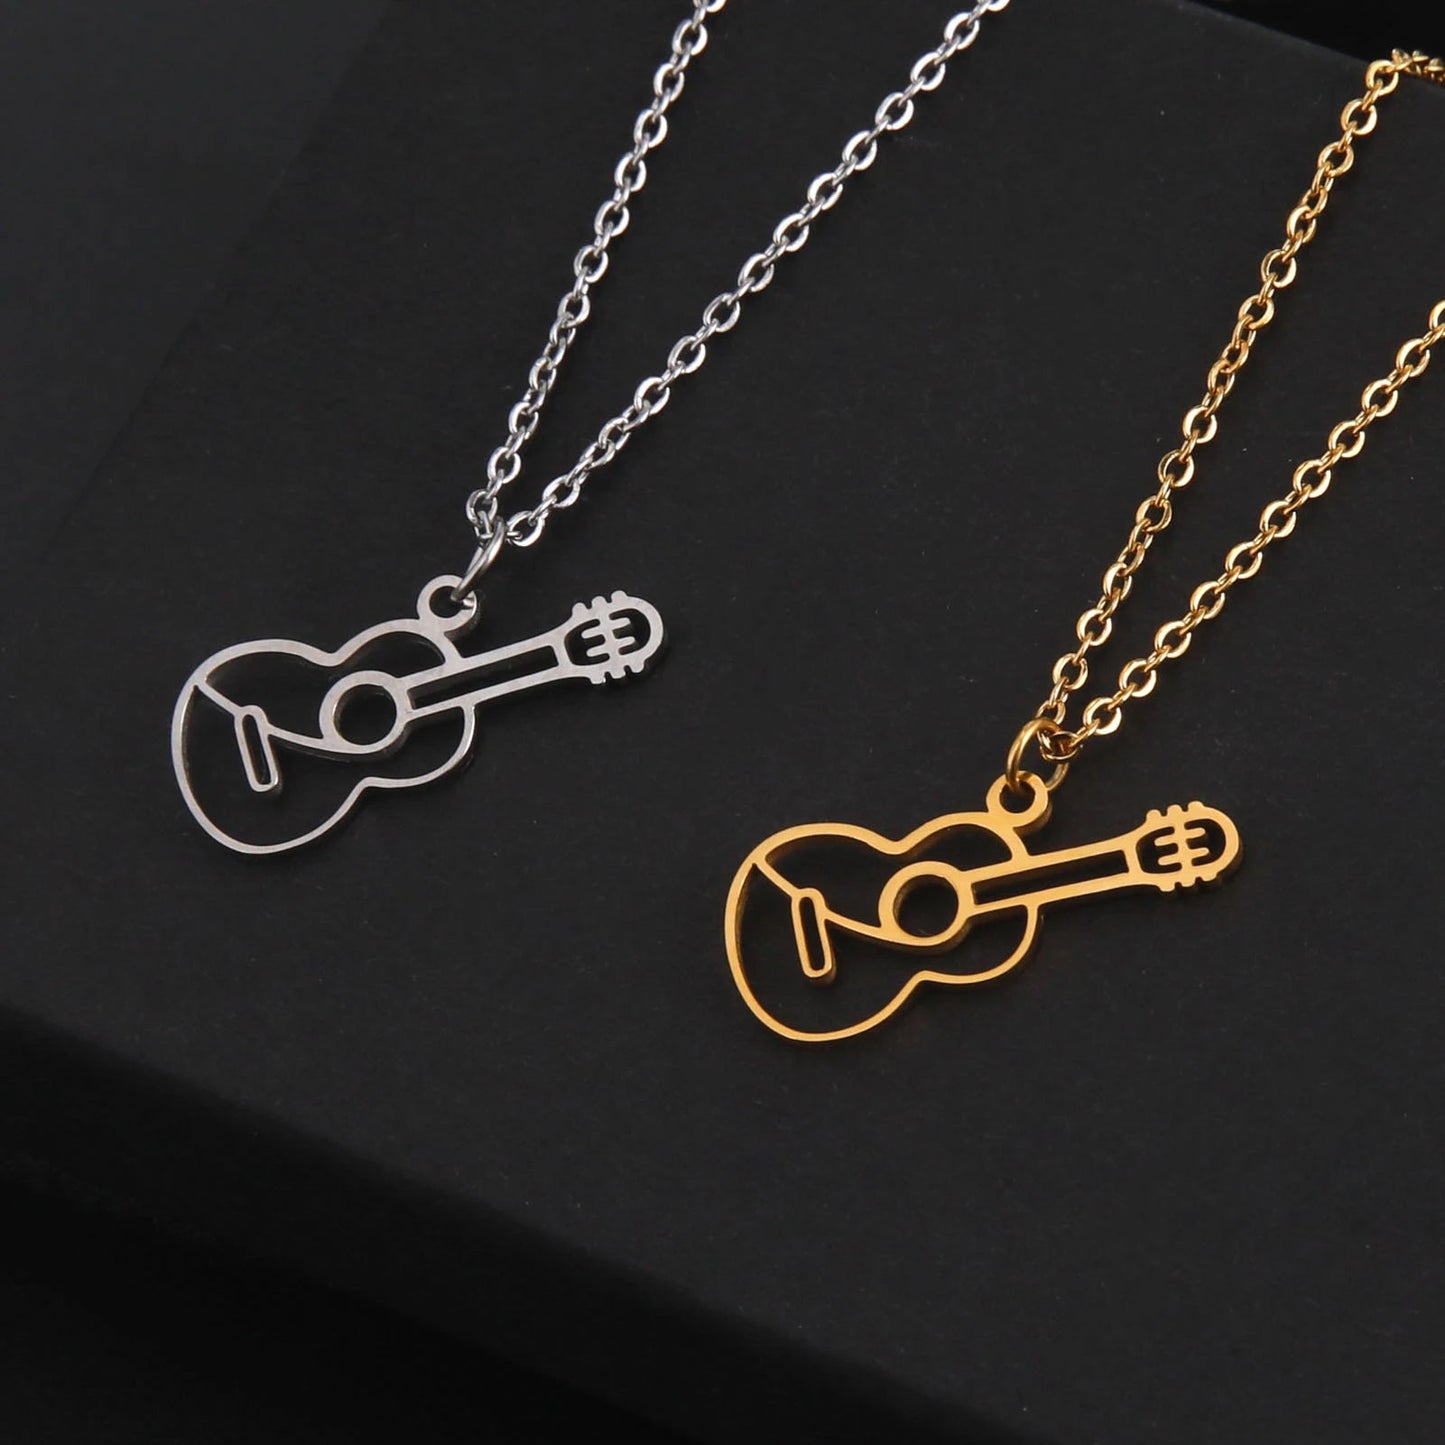 Stainless Steel Hollow Guitar Necklace Hip Hop Small Instrument Pendant for Women Man Rock Music Jewelry Gift Hot Fashion New - Oba Buy